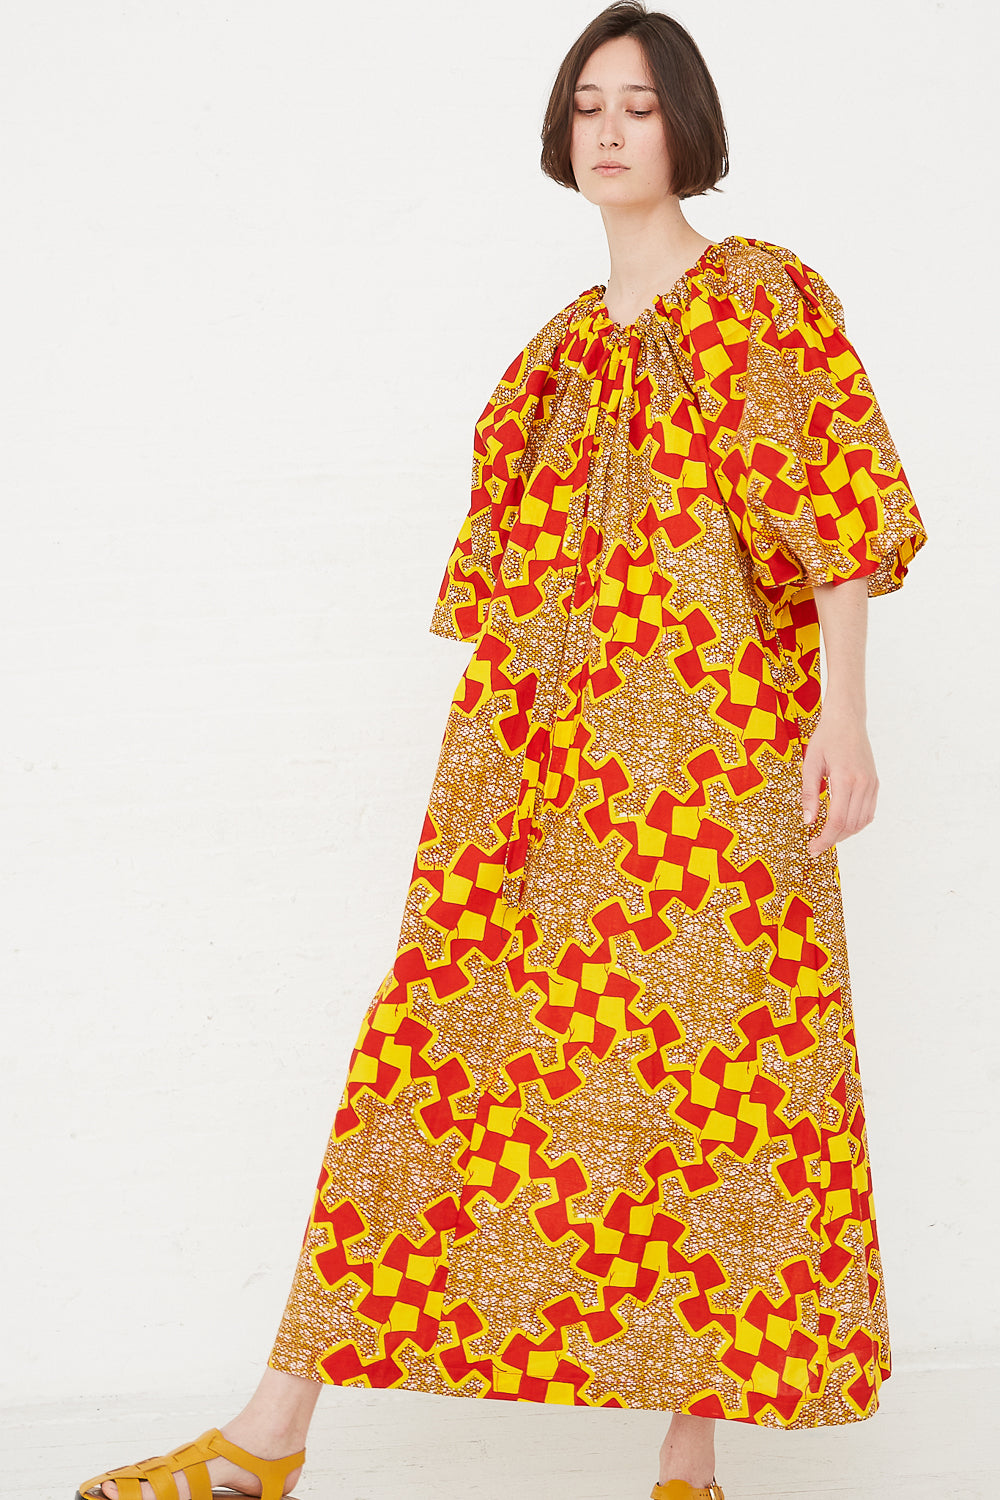 Odile Jacobs - Arielle Dress in Yellow/Red front view